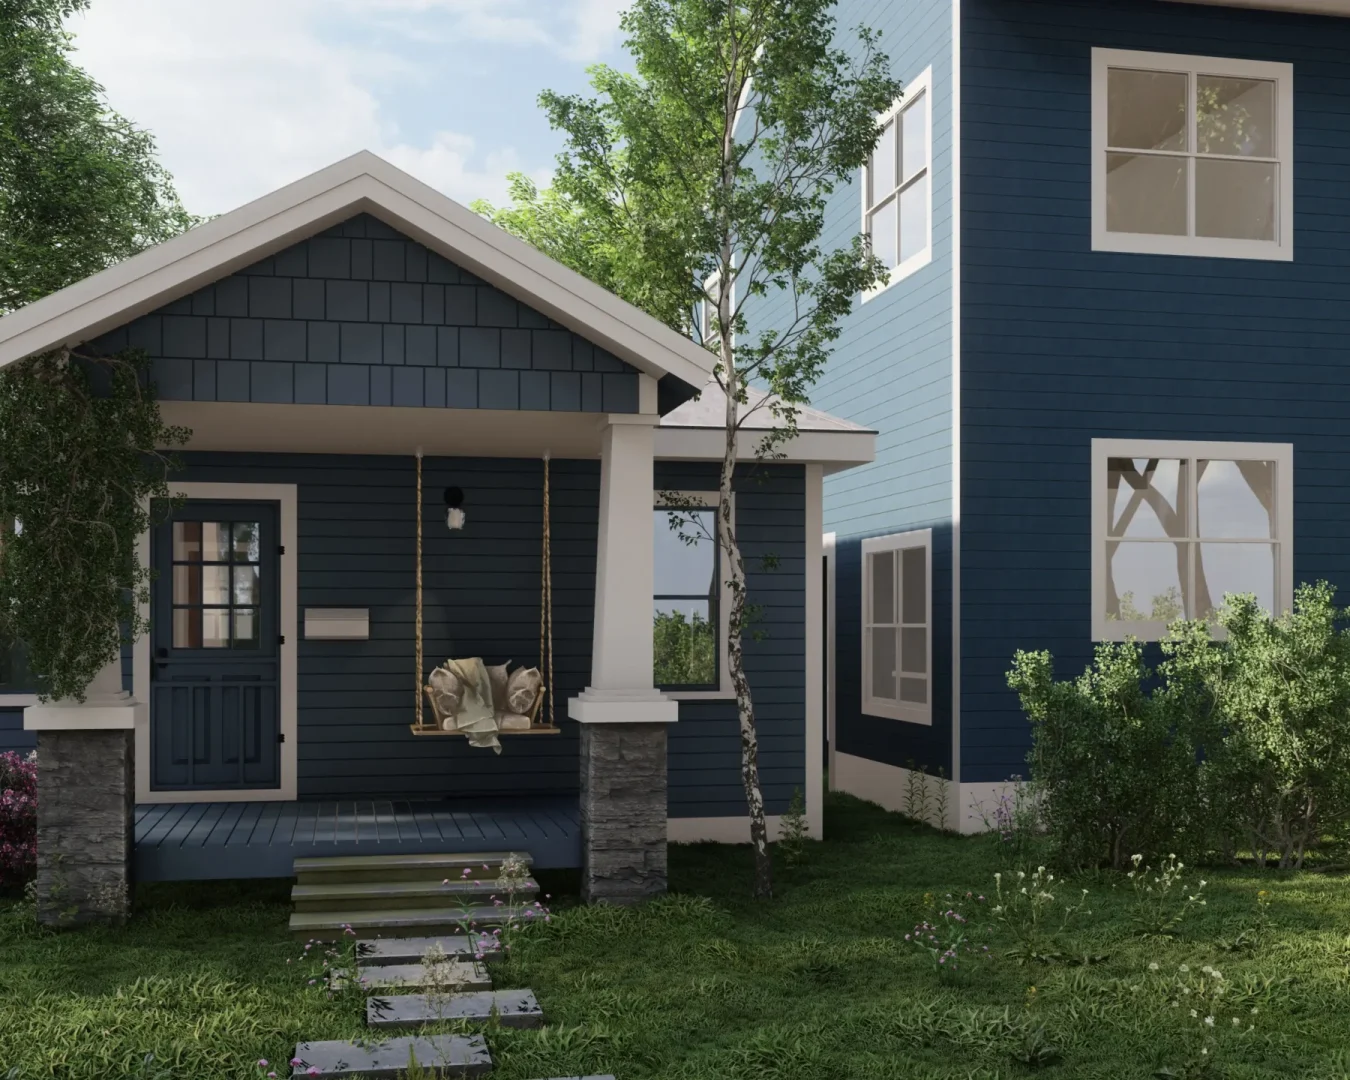 A cozy blue cottage with a welcoming porch swing, surrounded by greenery. The design offers a perfect blend of comfort and charm, ideal for a peaceful living environment. Design by Debora, an online interior design service.